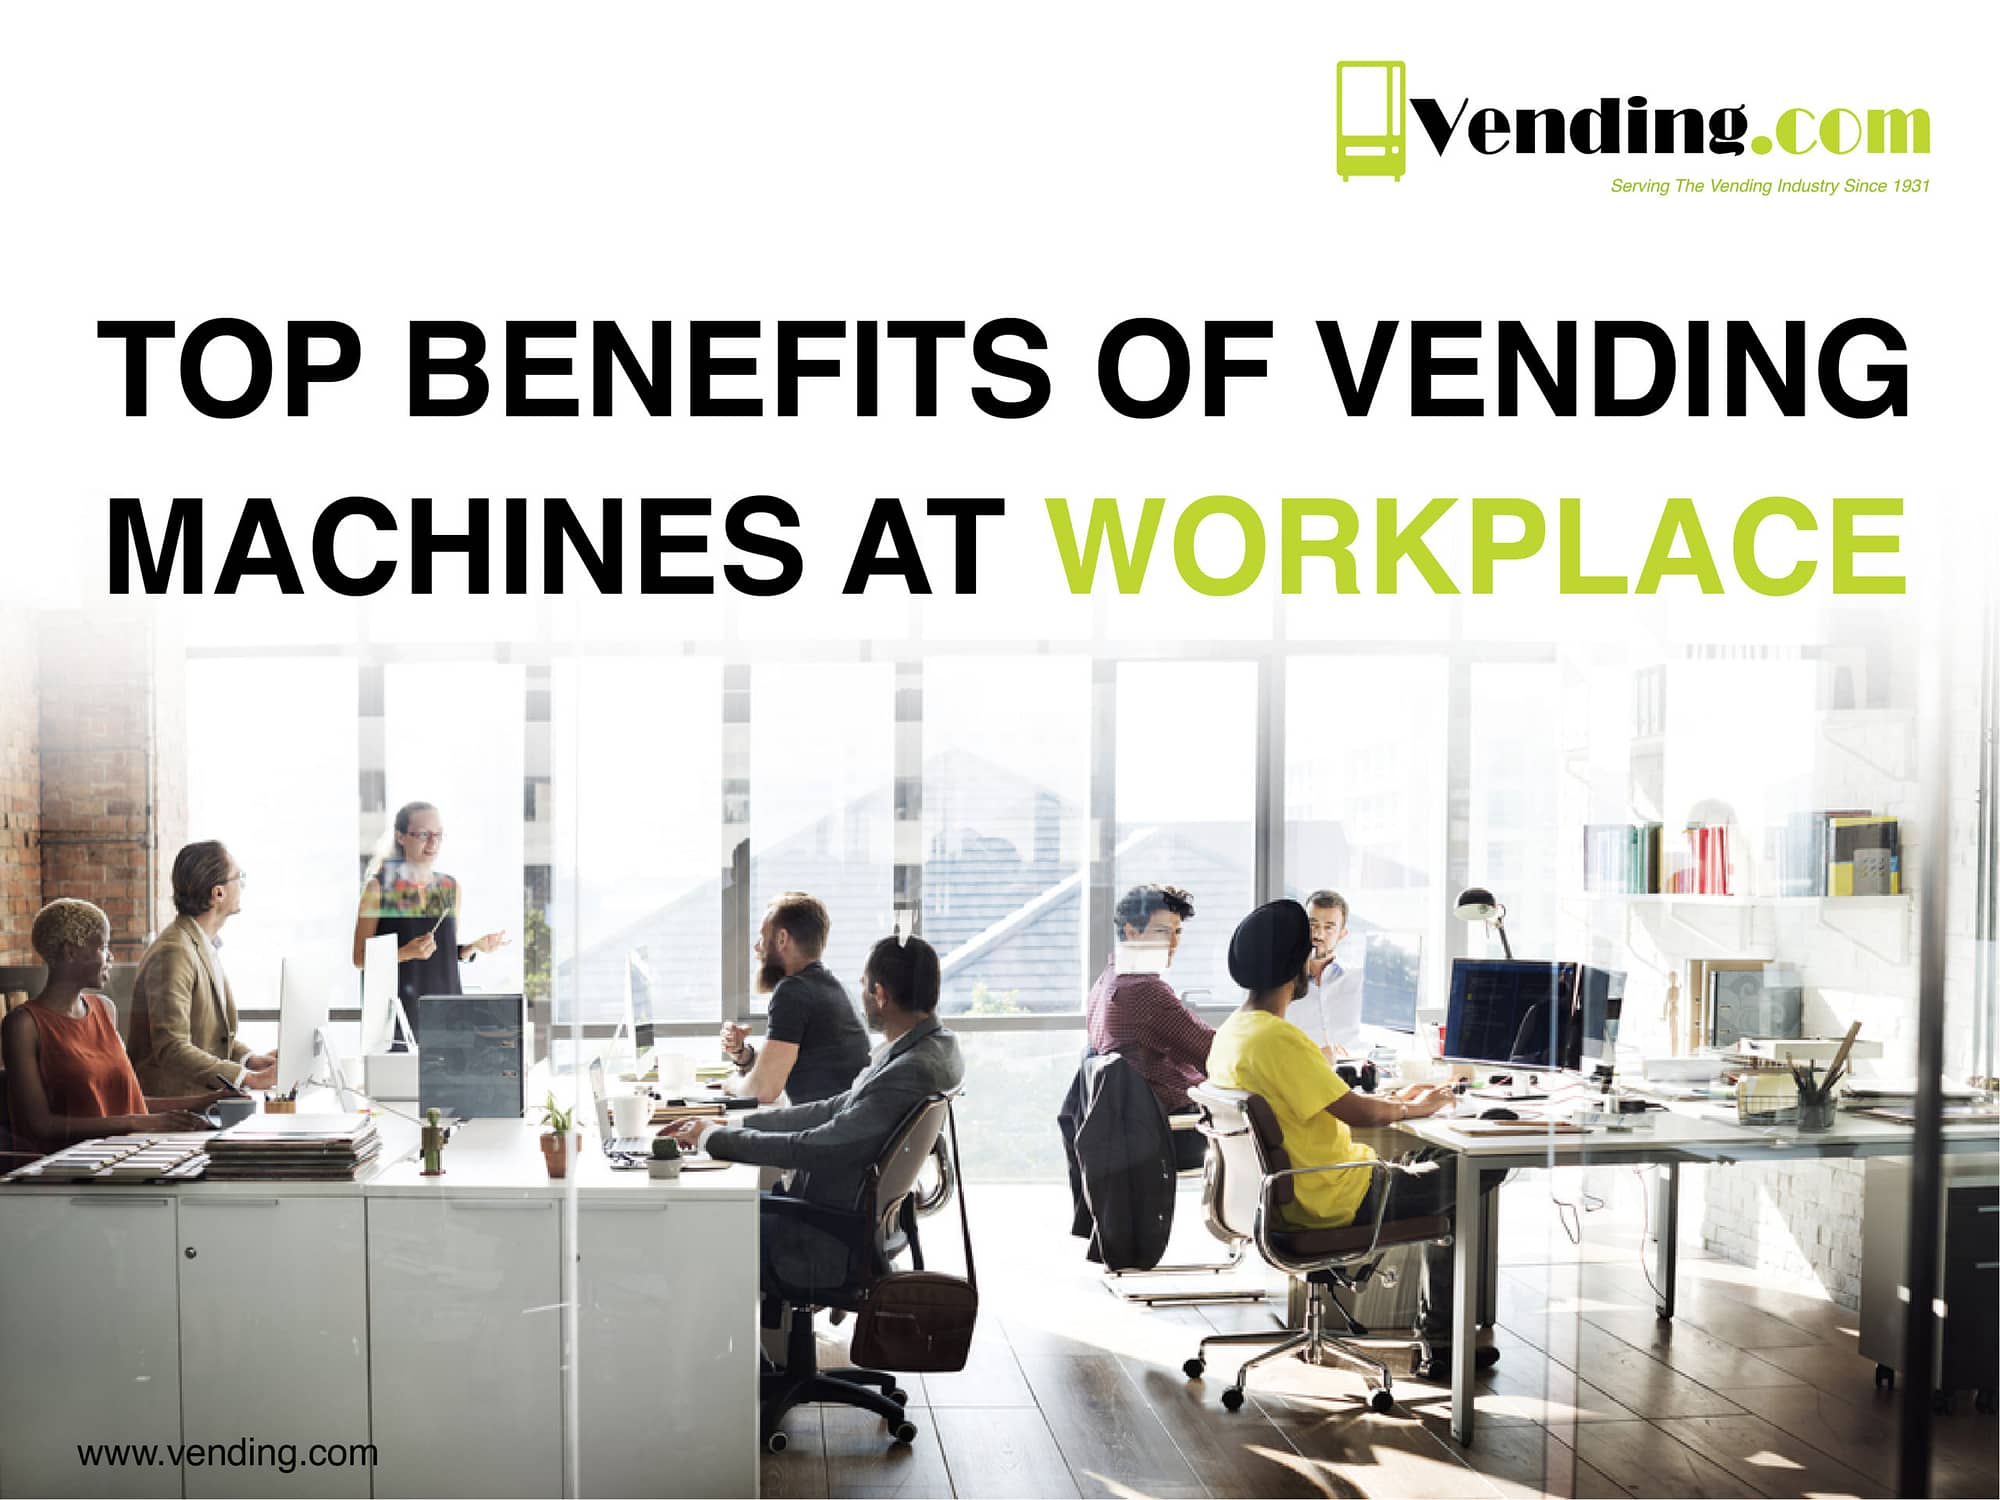 vending.com - Top Benefits of Vending Machines at Workplace